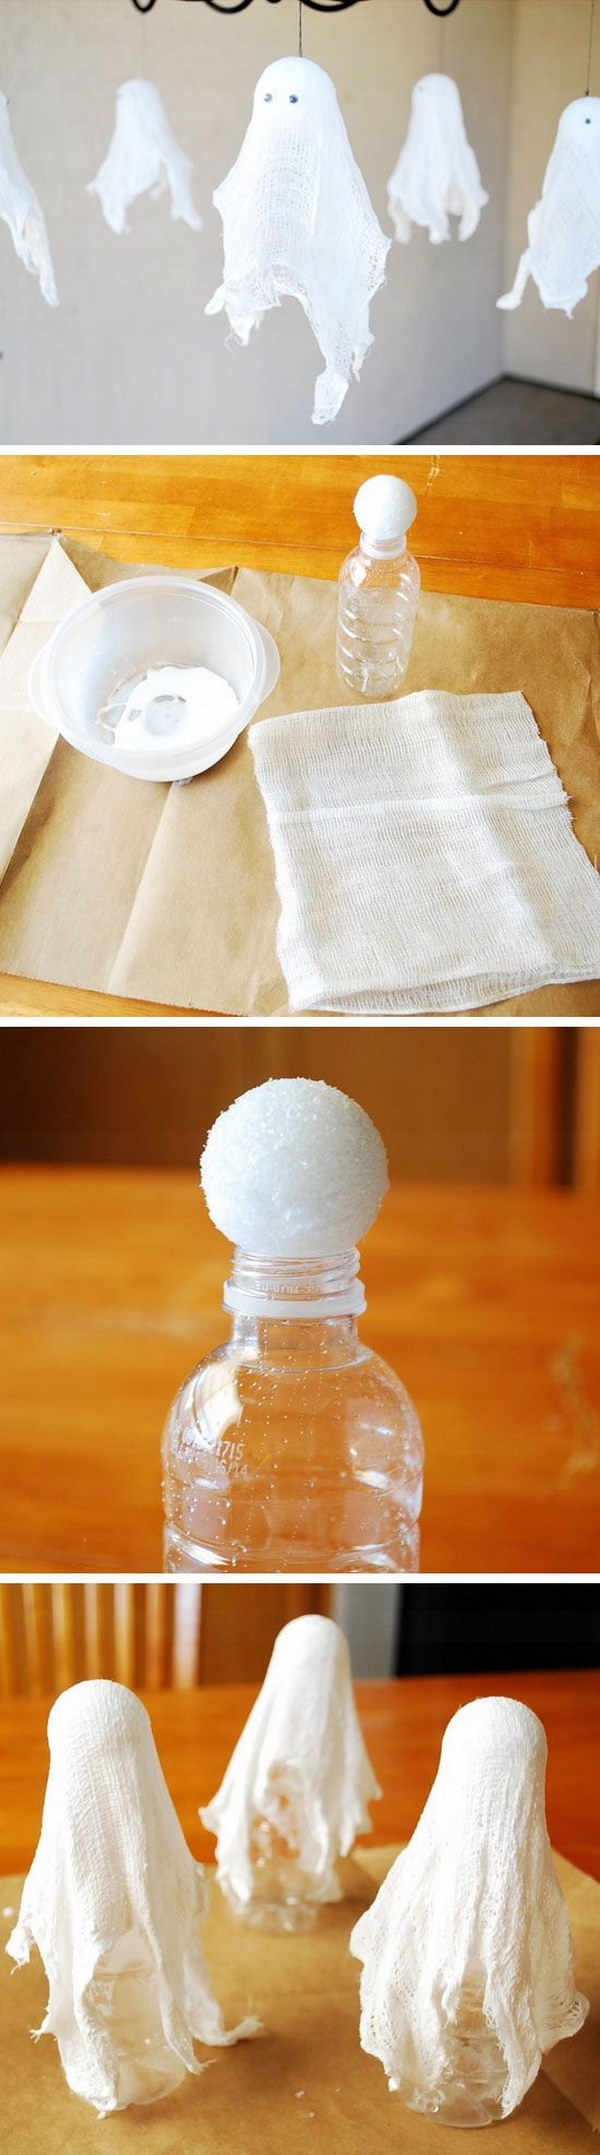 DIY Hanging Cheesecloth Ghosts 